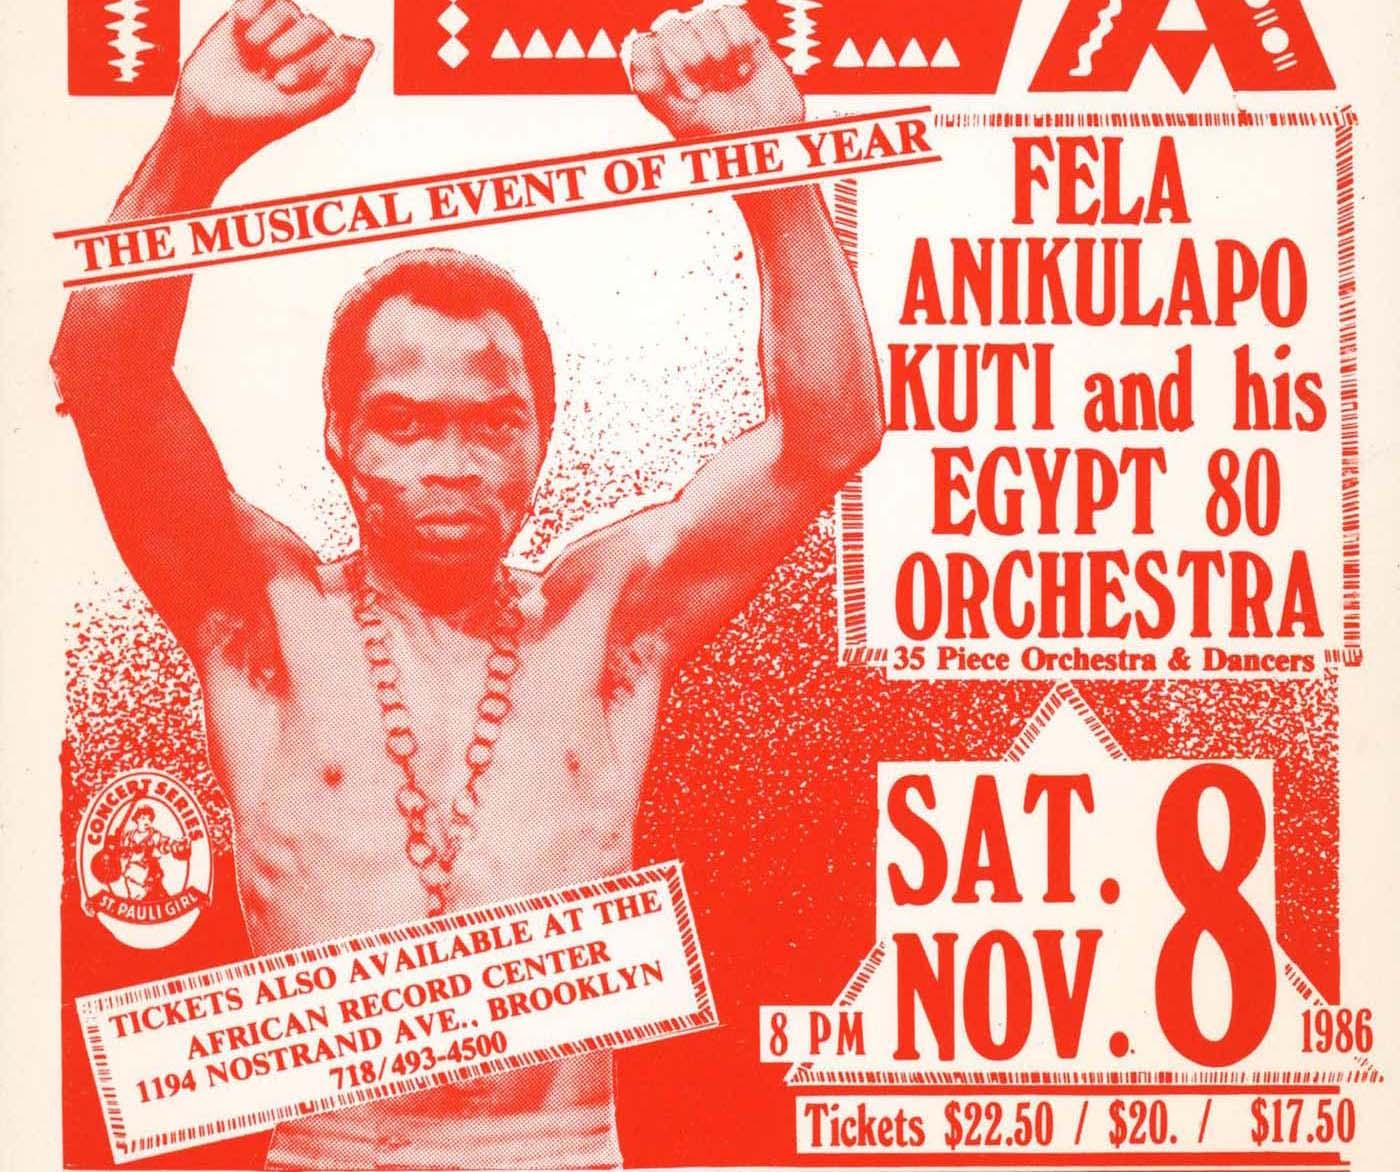 Vintage 1980's Fela Kuti announcement:
Original Fela Kuti announcement published on the occasion of his November 6th 1986 show at Madison Square Garden's The Felt Forum. A rare must have Fela Kuti collectible. Beginning in the 1960s, Fela Kuti